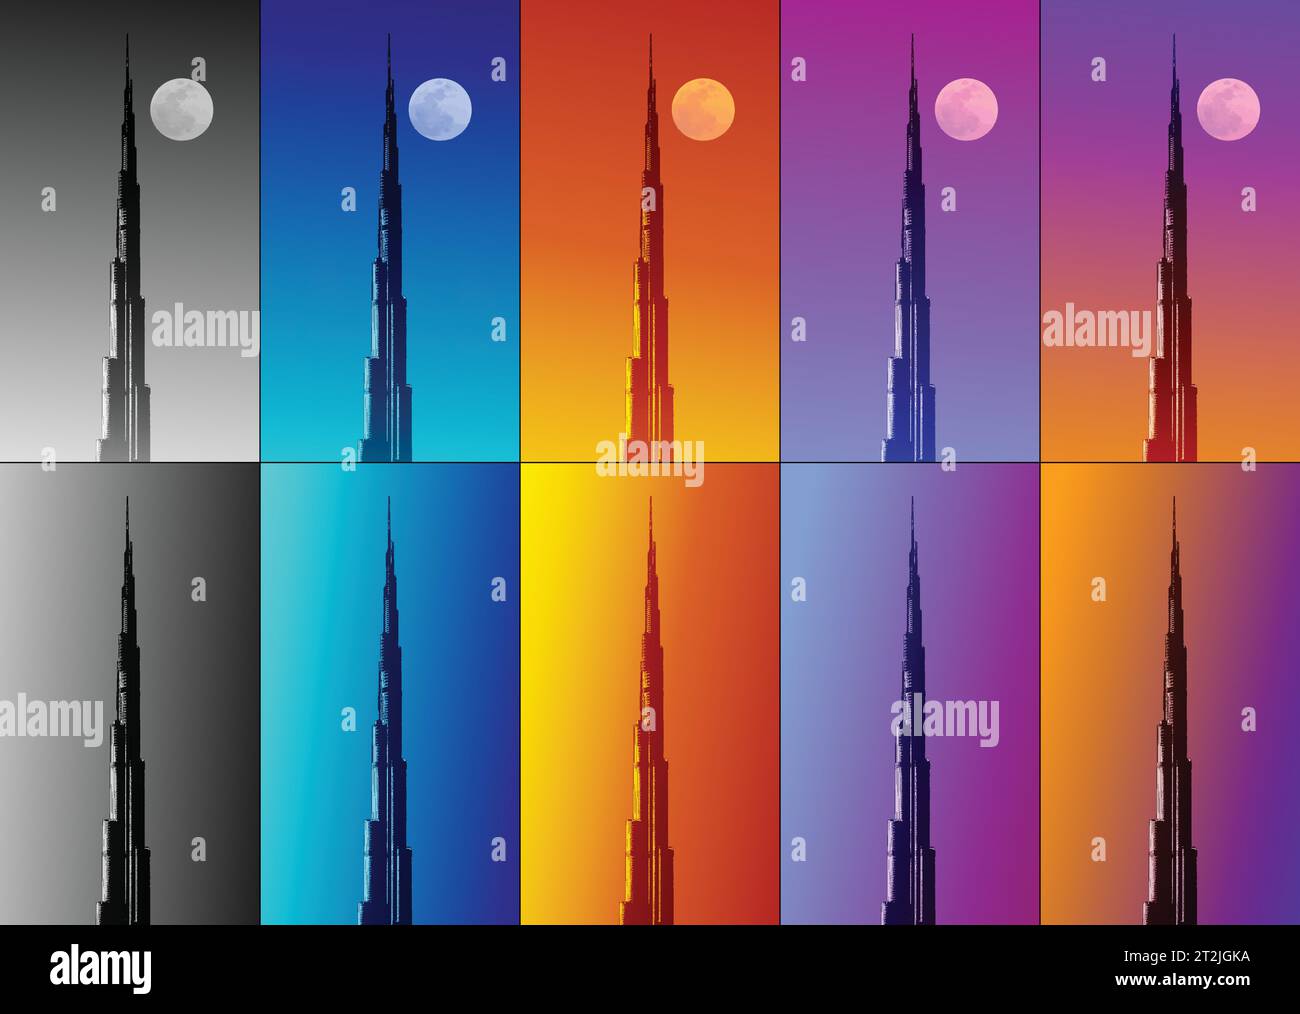 Burj Khalifa of Dubai Vector file with Ten Different Gradient Background Illustrations for Your Choice. Stock Vector